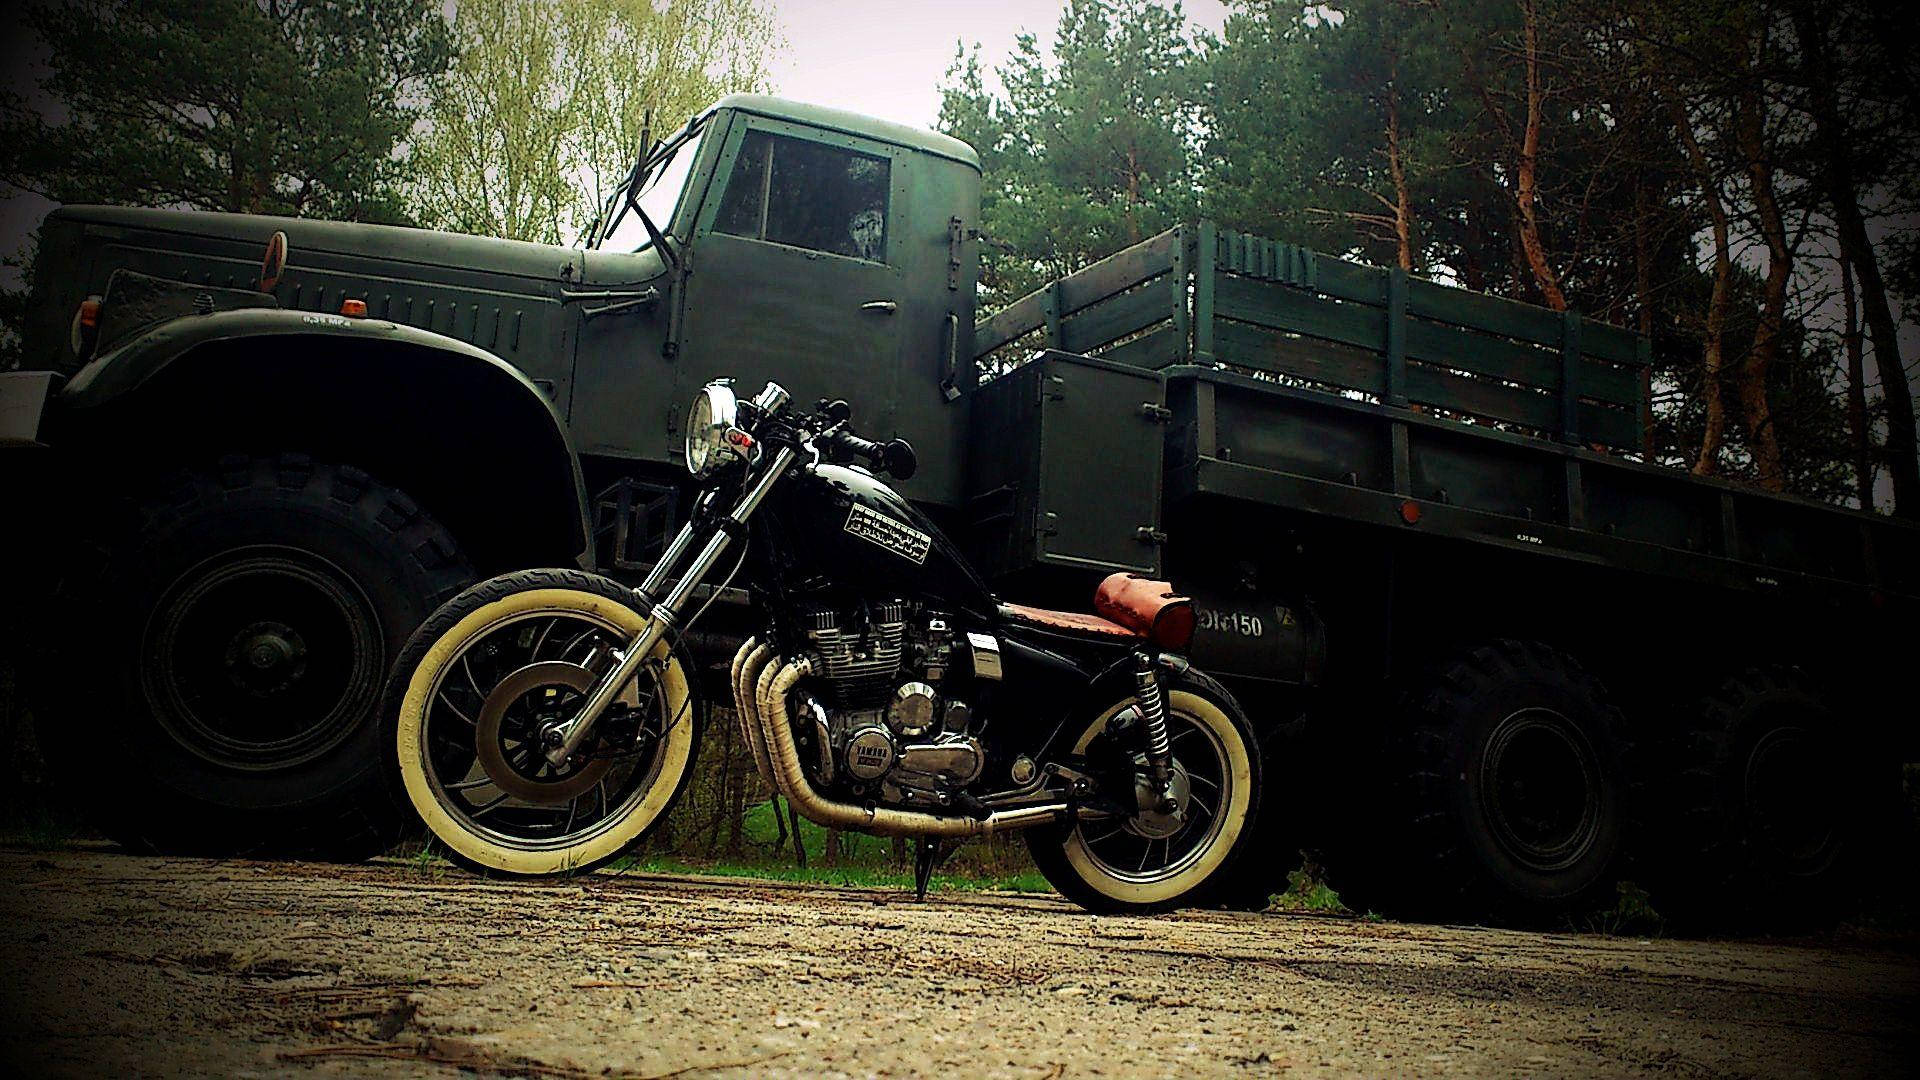 Bobber Motorcycle By An Army Truck